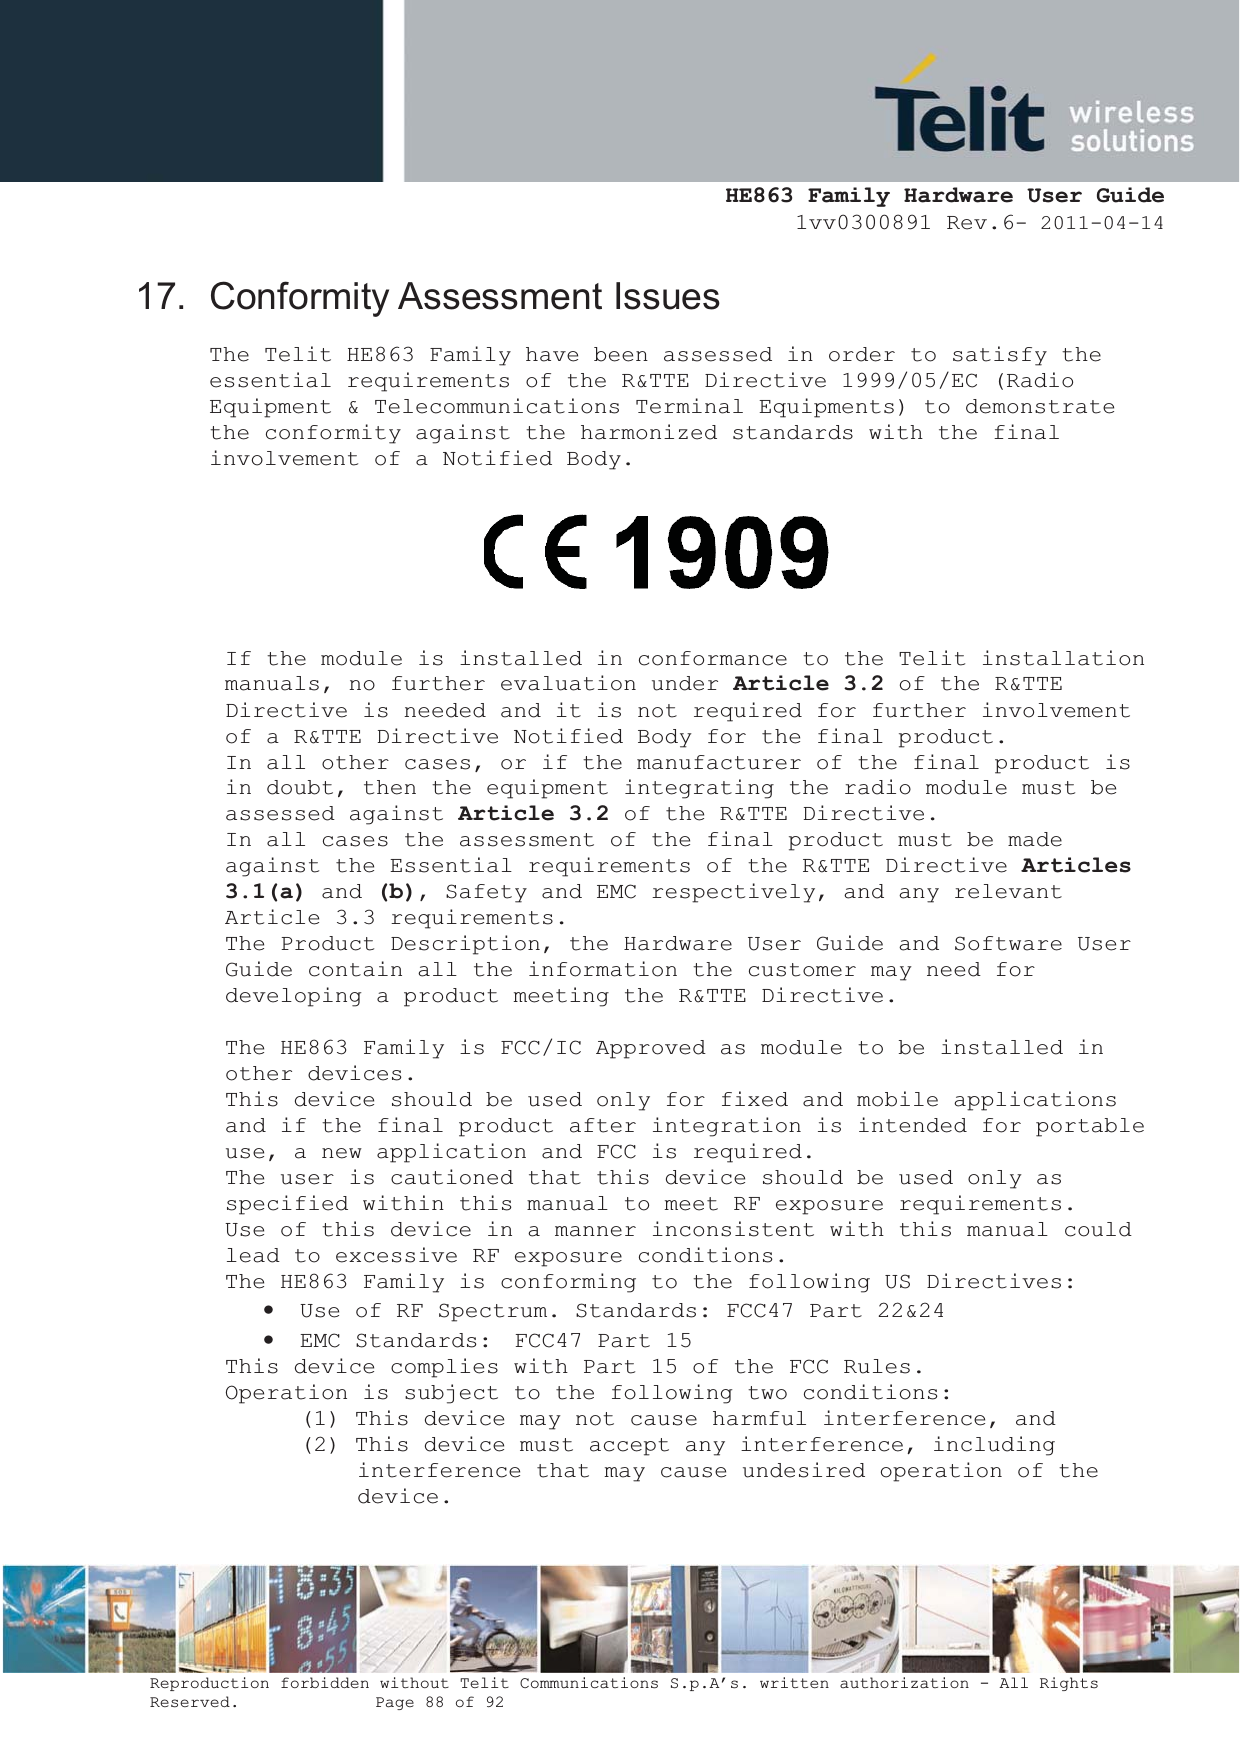  HE863 Family Hardware User Guide 1vv0300891 Rev.6- 2011-04-14    Reproduction forbidden without Telit Communications S.p.A’s. written authorization - All Rights Reserved.    Page 88 of 92  17. Conformity Assessment Issues The Telit HE863 Family have been assessed in order to satisfy the essential requirements of the R&amp;TTE Directive 1999/05/EC (Radio  Equipment &amp; Telecommunications Terminal Equipments) to demonstrate  the conformity against the harmonized standards with the final  involvement of a Notified Body.   If the module is installed in conformance to the Telit installation  manuals, no further evaluation under Article 3.2 of the R&amp;TTE  Directive is needed and it is not required for further involvement  of a R&amp;TTE Directive Notified Body for the final product. In all other cases, or if the manufacturer of the final product is  in doubt, then the equipment integrating the radio module must be  assessed against Article 3.2 of the R&amp;TTE Directive. In all cases the assessment of the final product must be made  against the Essential requirements of the R&amp;TTE Directive Articles3.1(a) and (b), Safety and EMC respectively, and any relevant  Article 3.3 requirements. The Product Description, the Hardware User Guide and Software User  Guide contain all the information the customer may need for  developing a product meeting the R&amp;TTE Directive. The HE863 Family is FCC/IC Approved as module to be installed in  other devices. This device should be used only for fixed and mobile applications  and if the final product after integration is intended for portable use, a new application and FCC is required. The user is cautioned that this device should be used only as specified within this manual to meet RF exposure requirements.  Use of this device in a manner inconsistent with this manual could  lead to excessive RF exposure conditions. The HE863 Family is conforming to the following US Directives: • Use of RF Spectrum. Standards: FCC47 Part 22&amp;24 • EMC Standards:  FCC47 Part 15 This device complies with Part 15 of the FCC Rules. Operation is subject to the following two conditions: (1) This device may not cause harmful interference, and (2) This device must accept any interference, including interference that may cause undesired operation of the device.